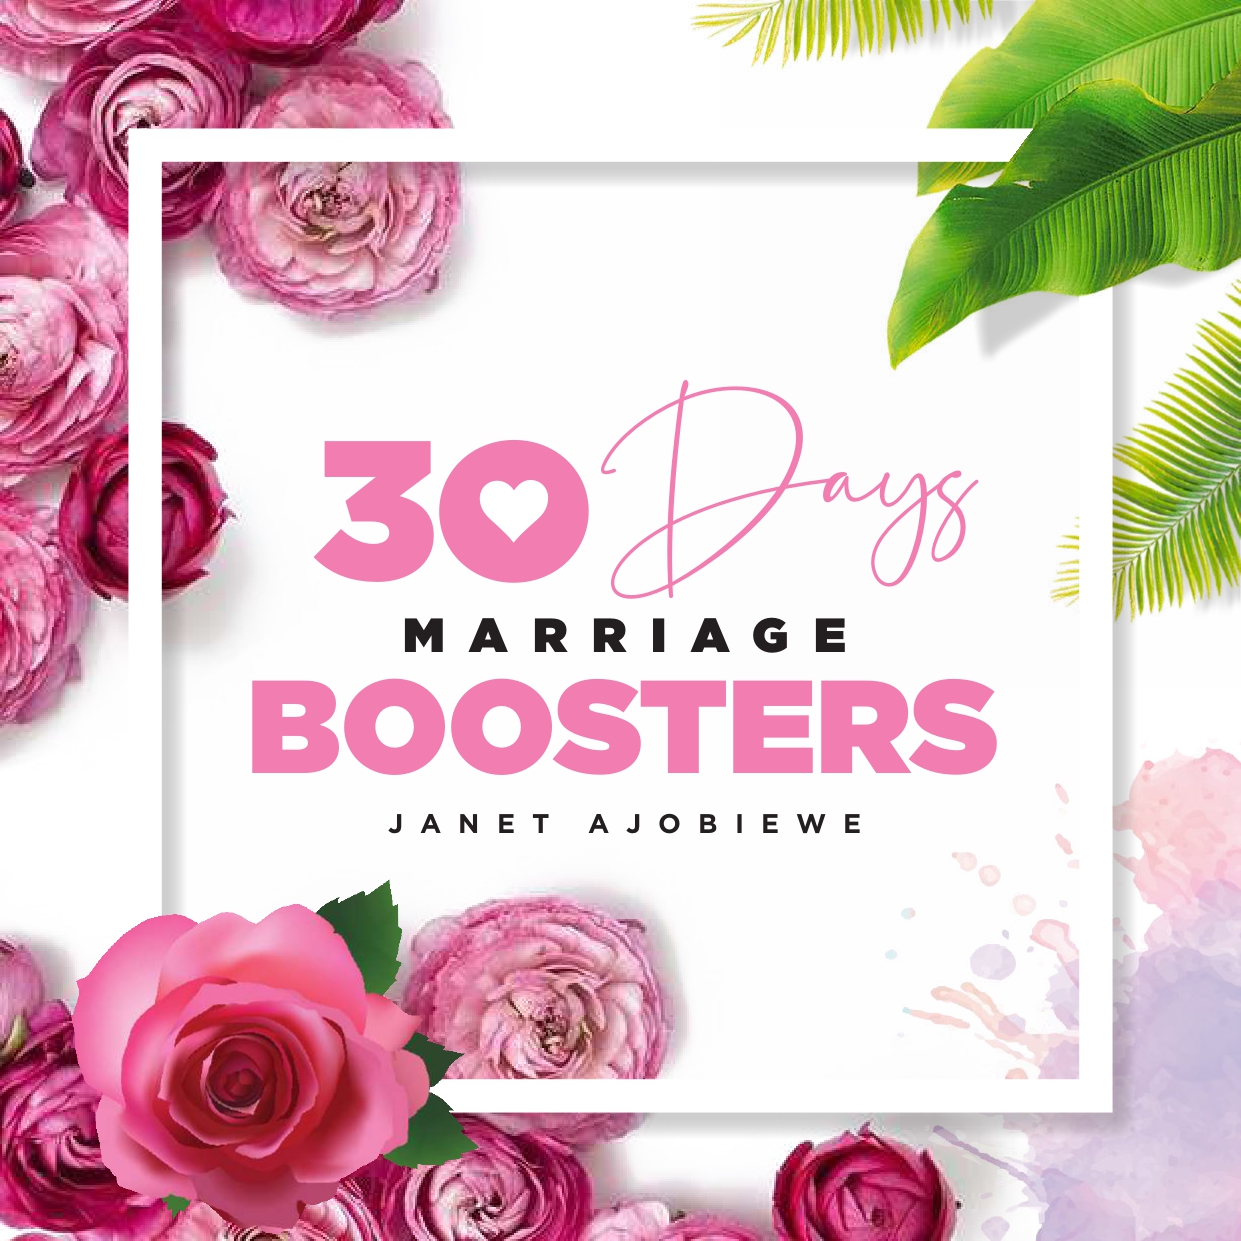 30-Days-Marriage-Boosters